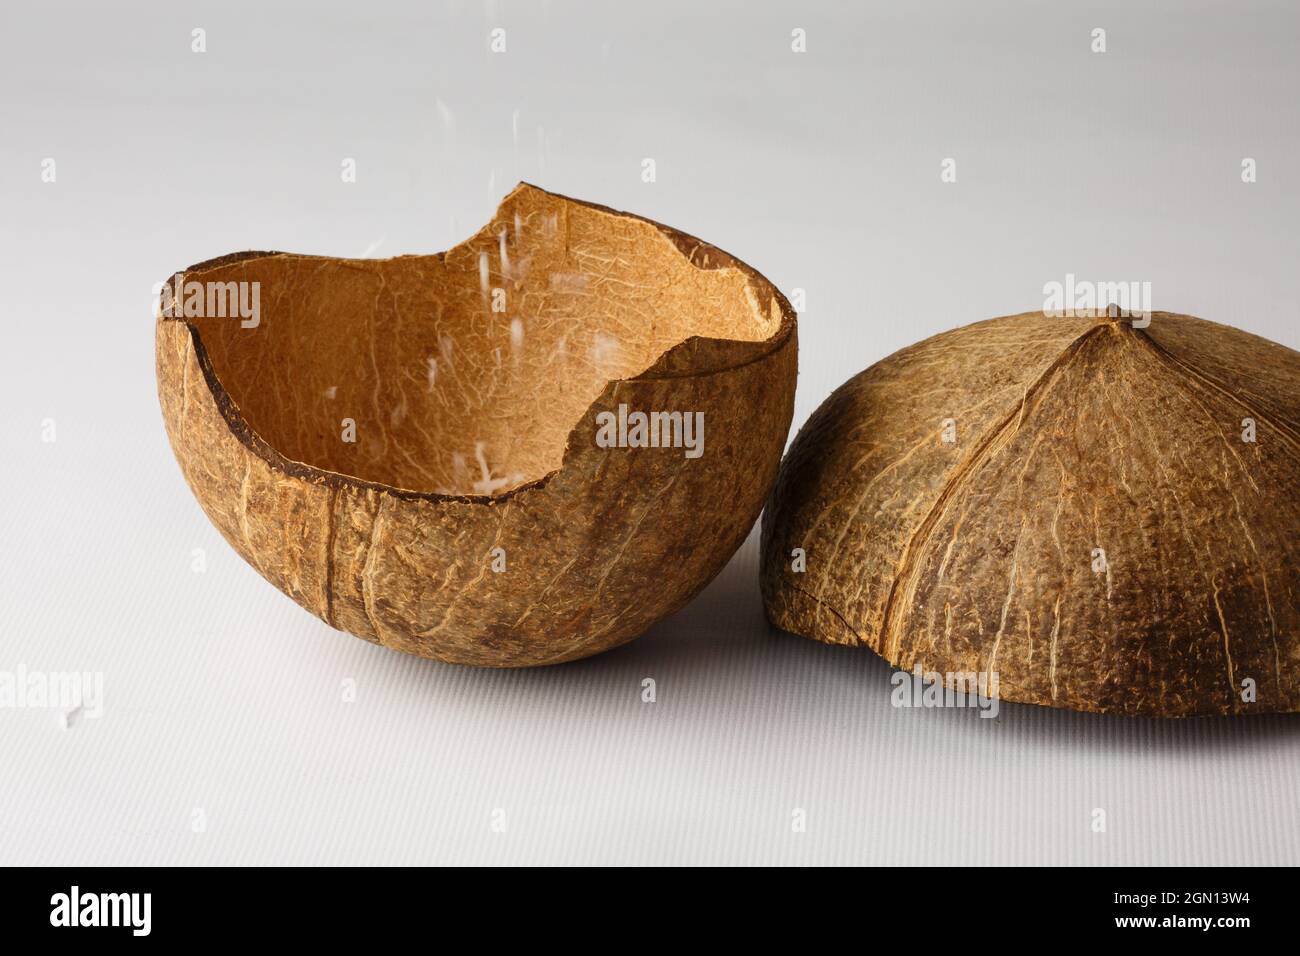 Coconut shell isolated on white background. The coconut flakes are removed from the inside of the coconut shell. Stock Photo